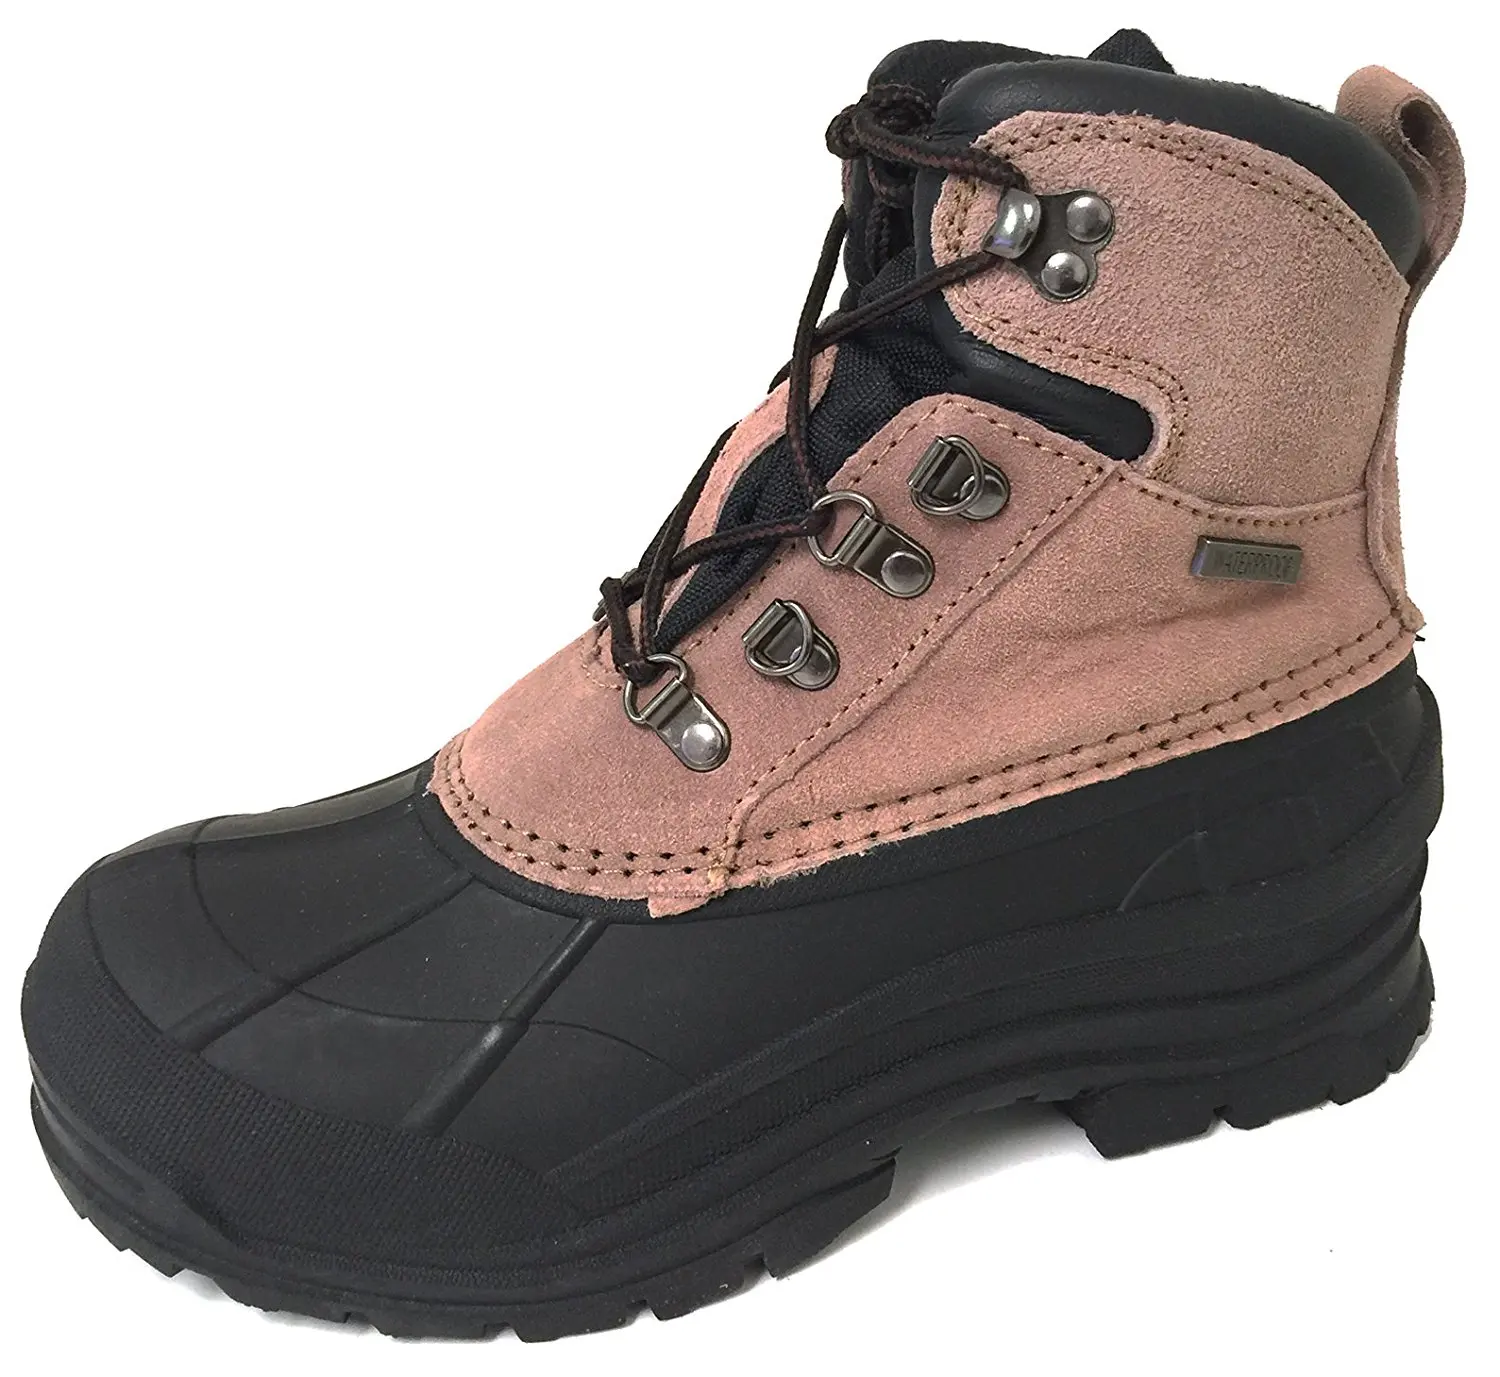 Cheap Cold Weather Hiking Boots, find Cold Weather Hiking Boots deals on line at Alibaba.com